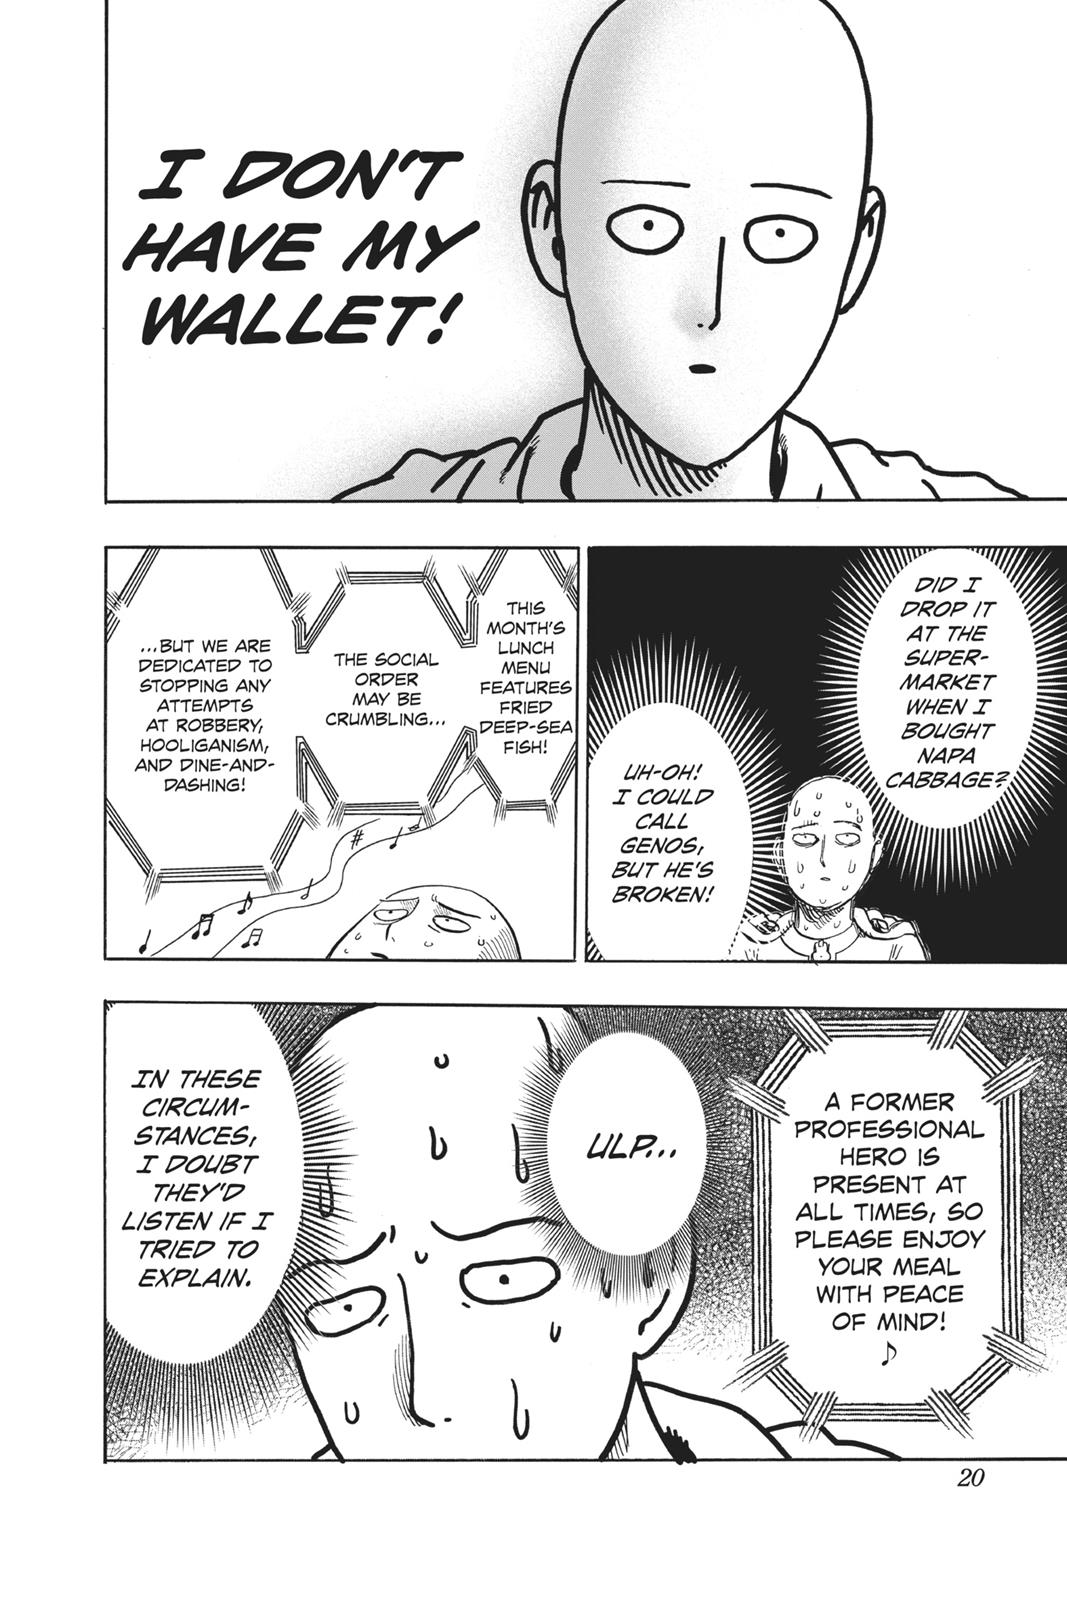 One-Punch Man, Punch 88 image 20